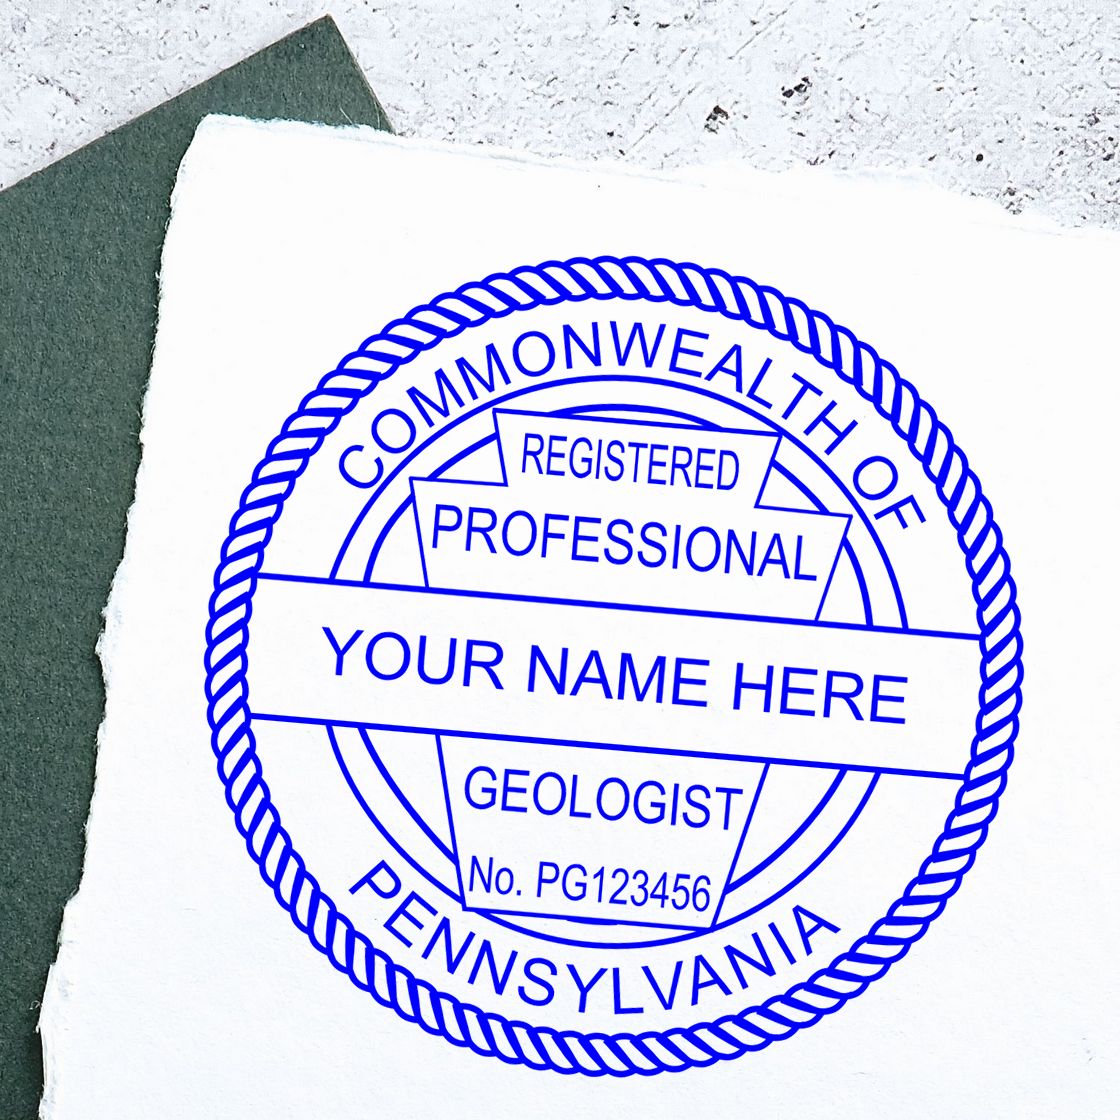 A lifestyle photo showing a stamped image of the Digital Pennsylvania Geologist Stamp, Electronic Seal for Pennsylvania Geologist on a piece of paper